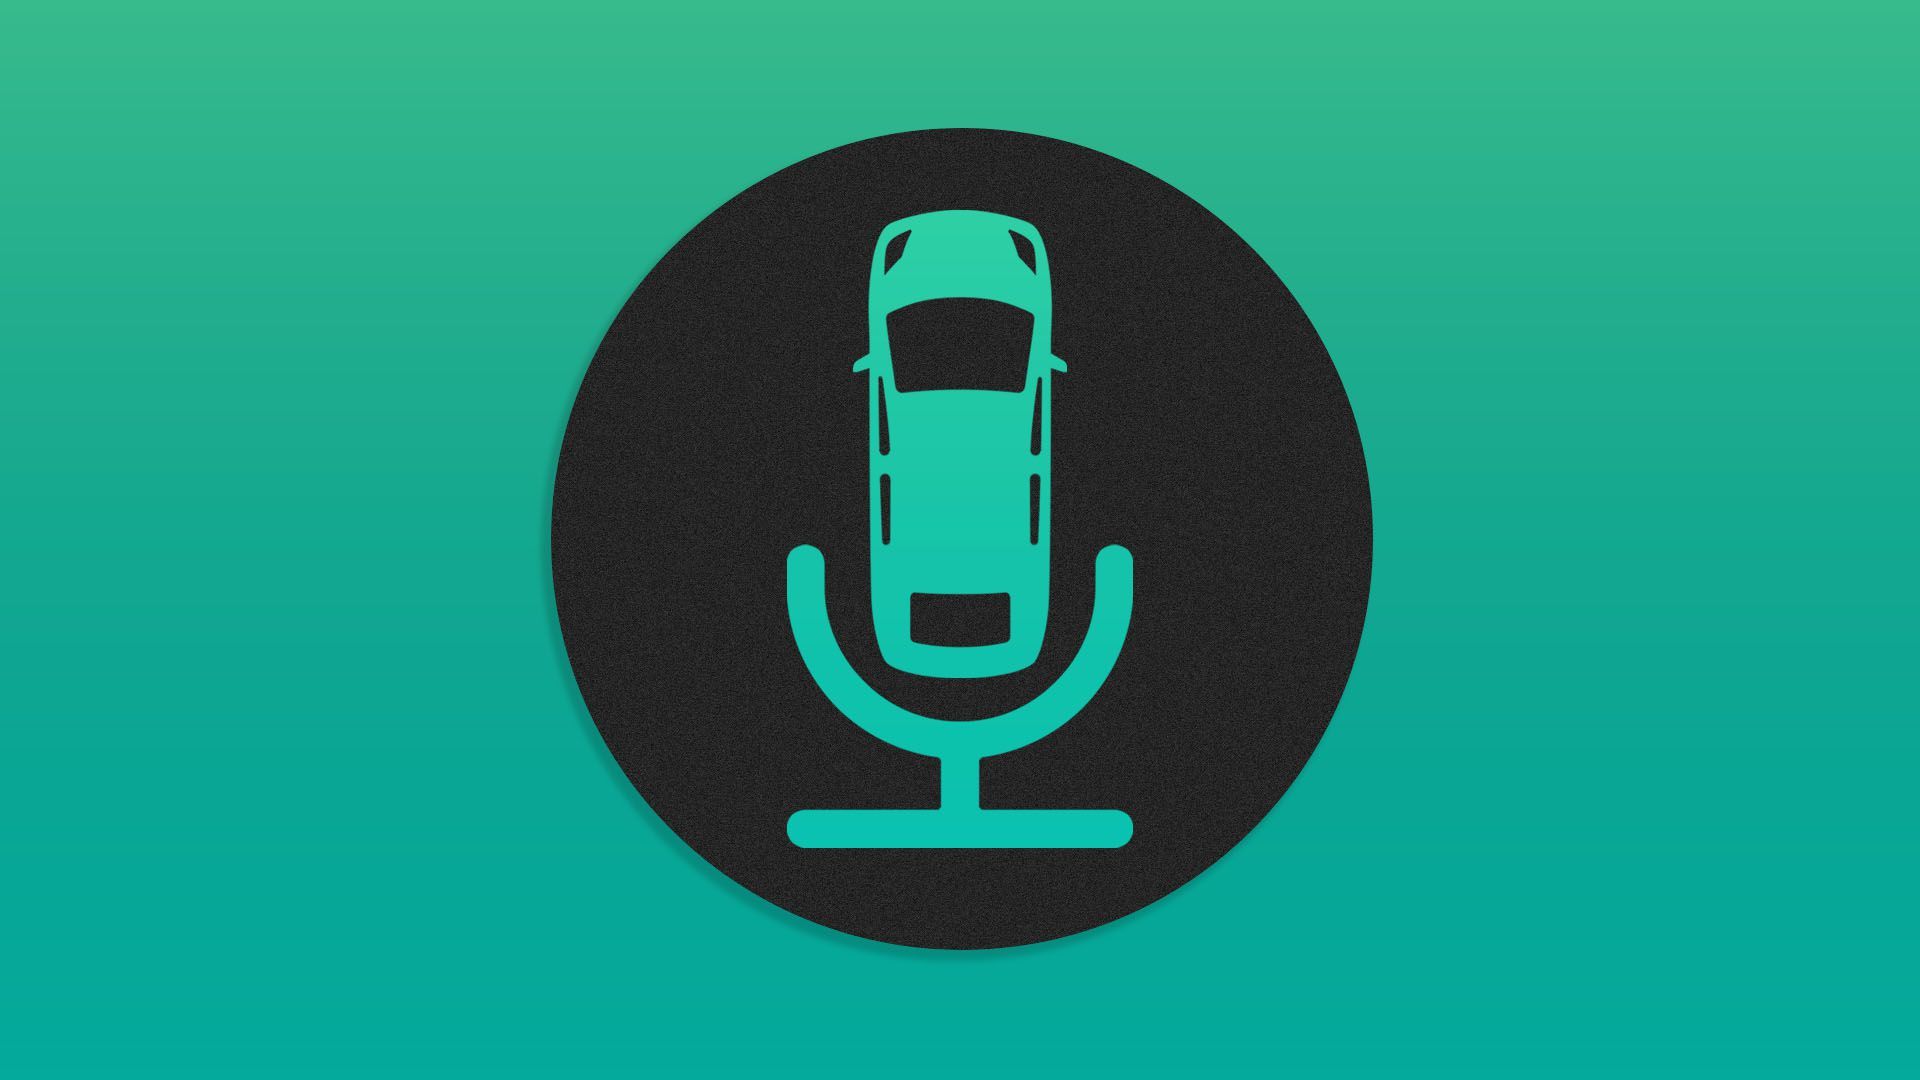 Illustration of microphone logo with a car in it